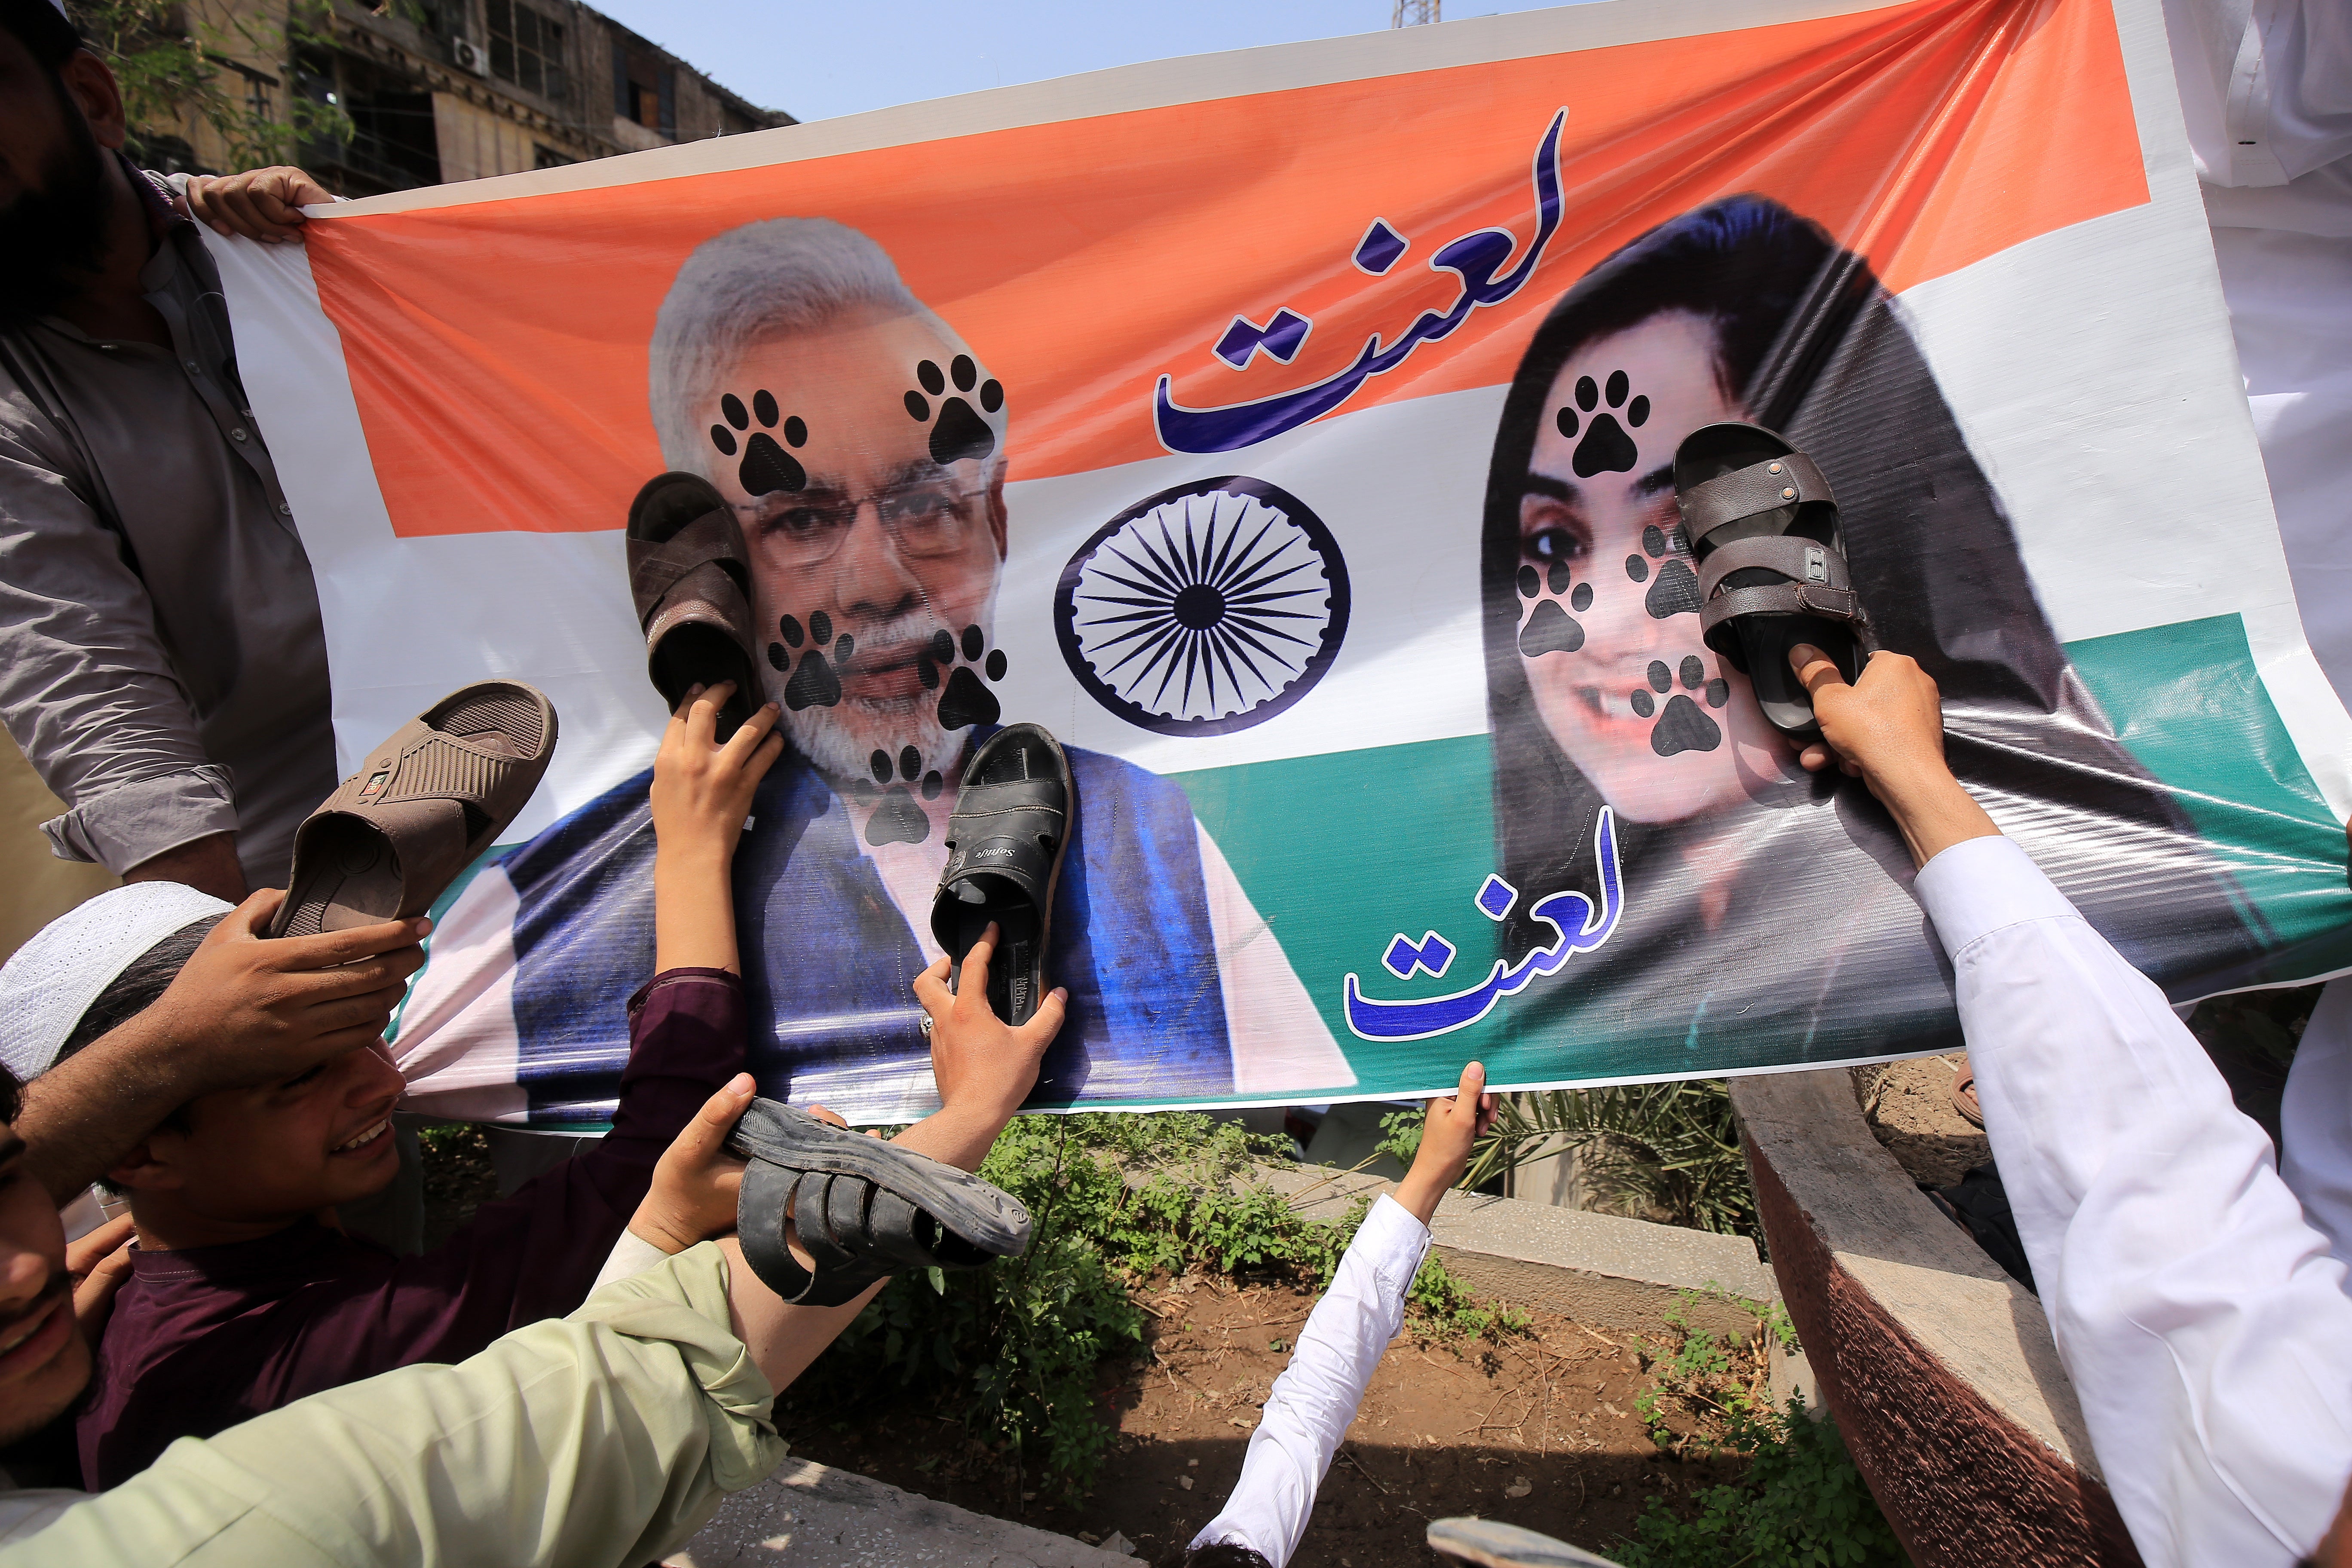 Supporters of Muttahida Shariat Mahaz Pakistan conservative party hold their shoes against a banner depicting Indian prime minister Narendra Modi (left) and former BJP spokesperson Nupur Sharma (right) during a protest in Pakistan’s Peshawar city on 10 June